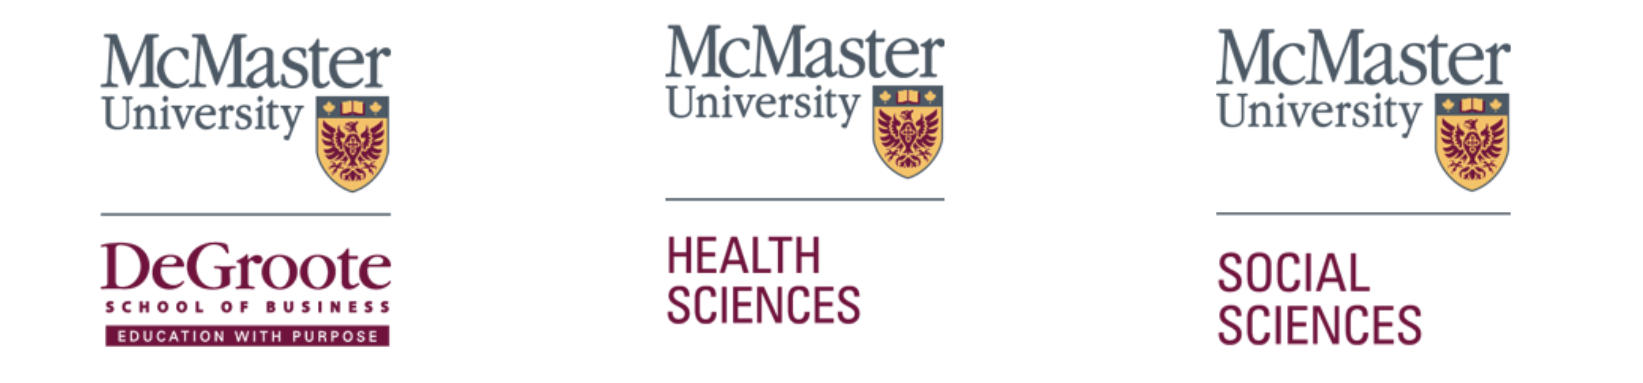 DeGroote School of Business, Faculty of Health Sciences, and Faculty of Social Sciences logos